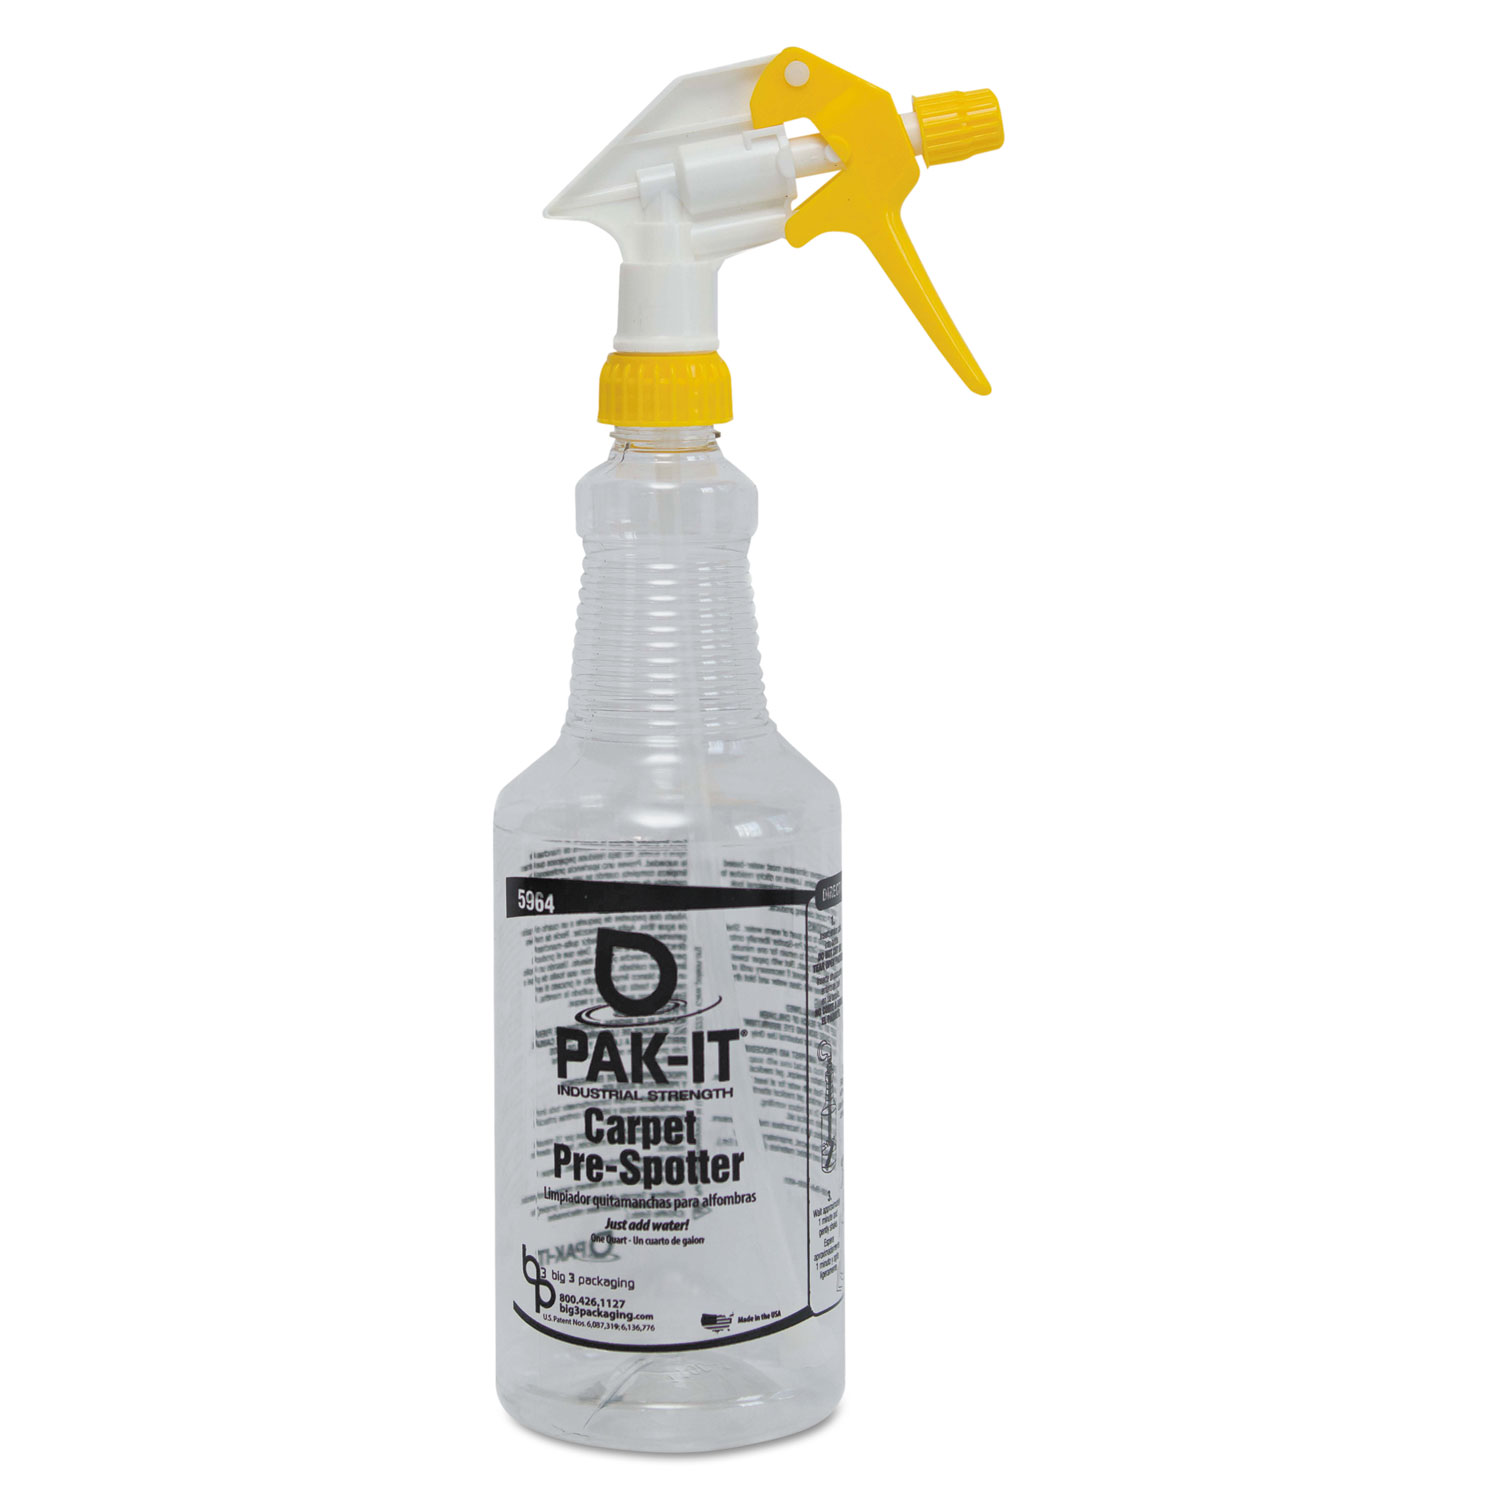 Empty Color-Coded Trigger-Spray Bottle, 32 oz, Yellow, for Carpet Pre-Spotter